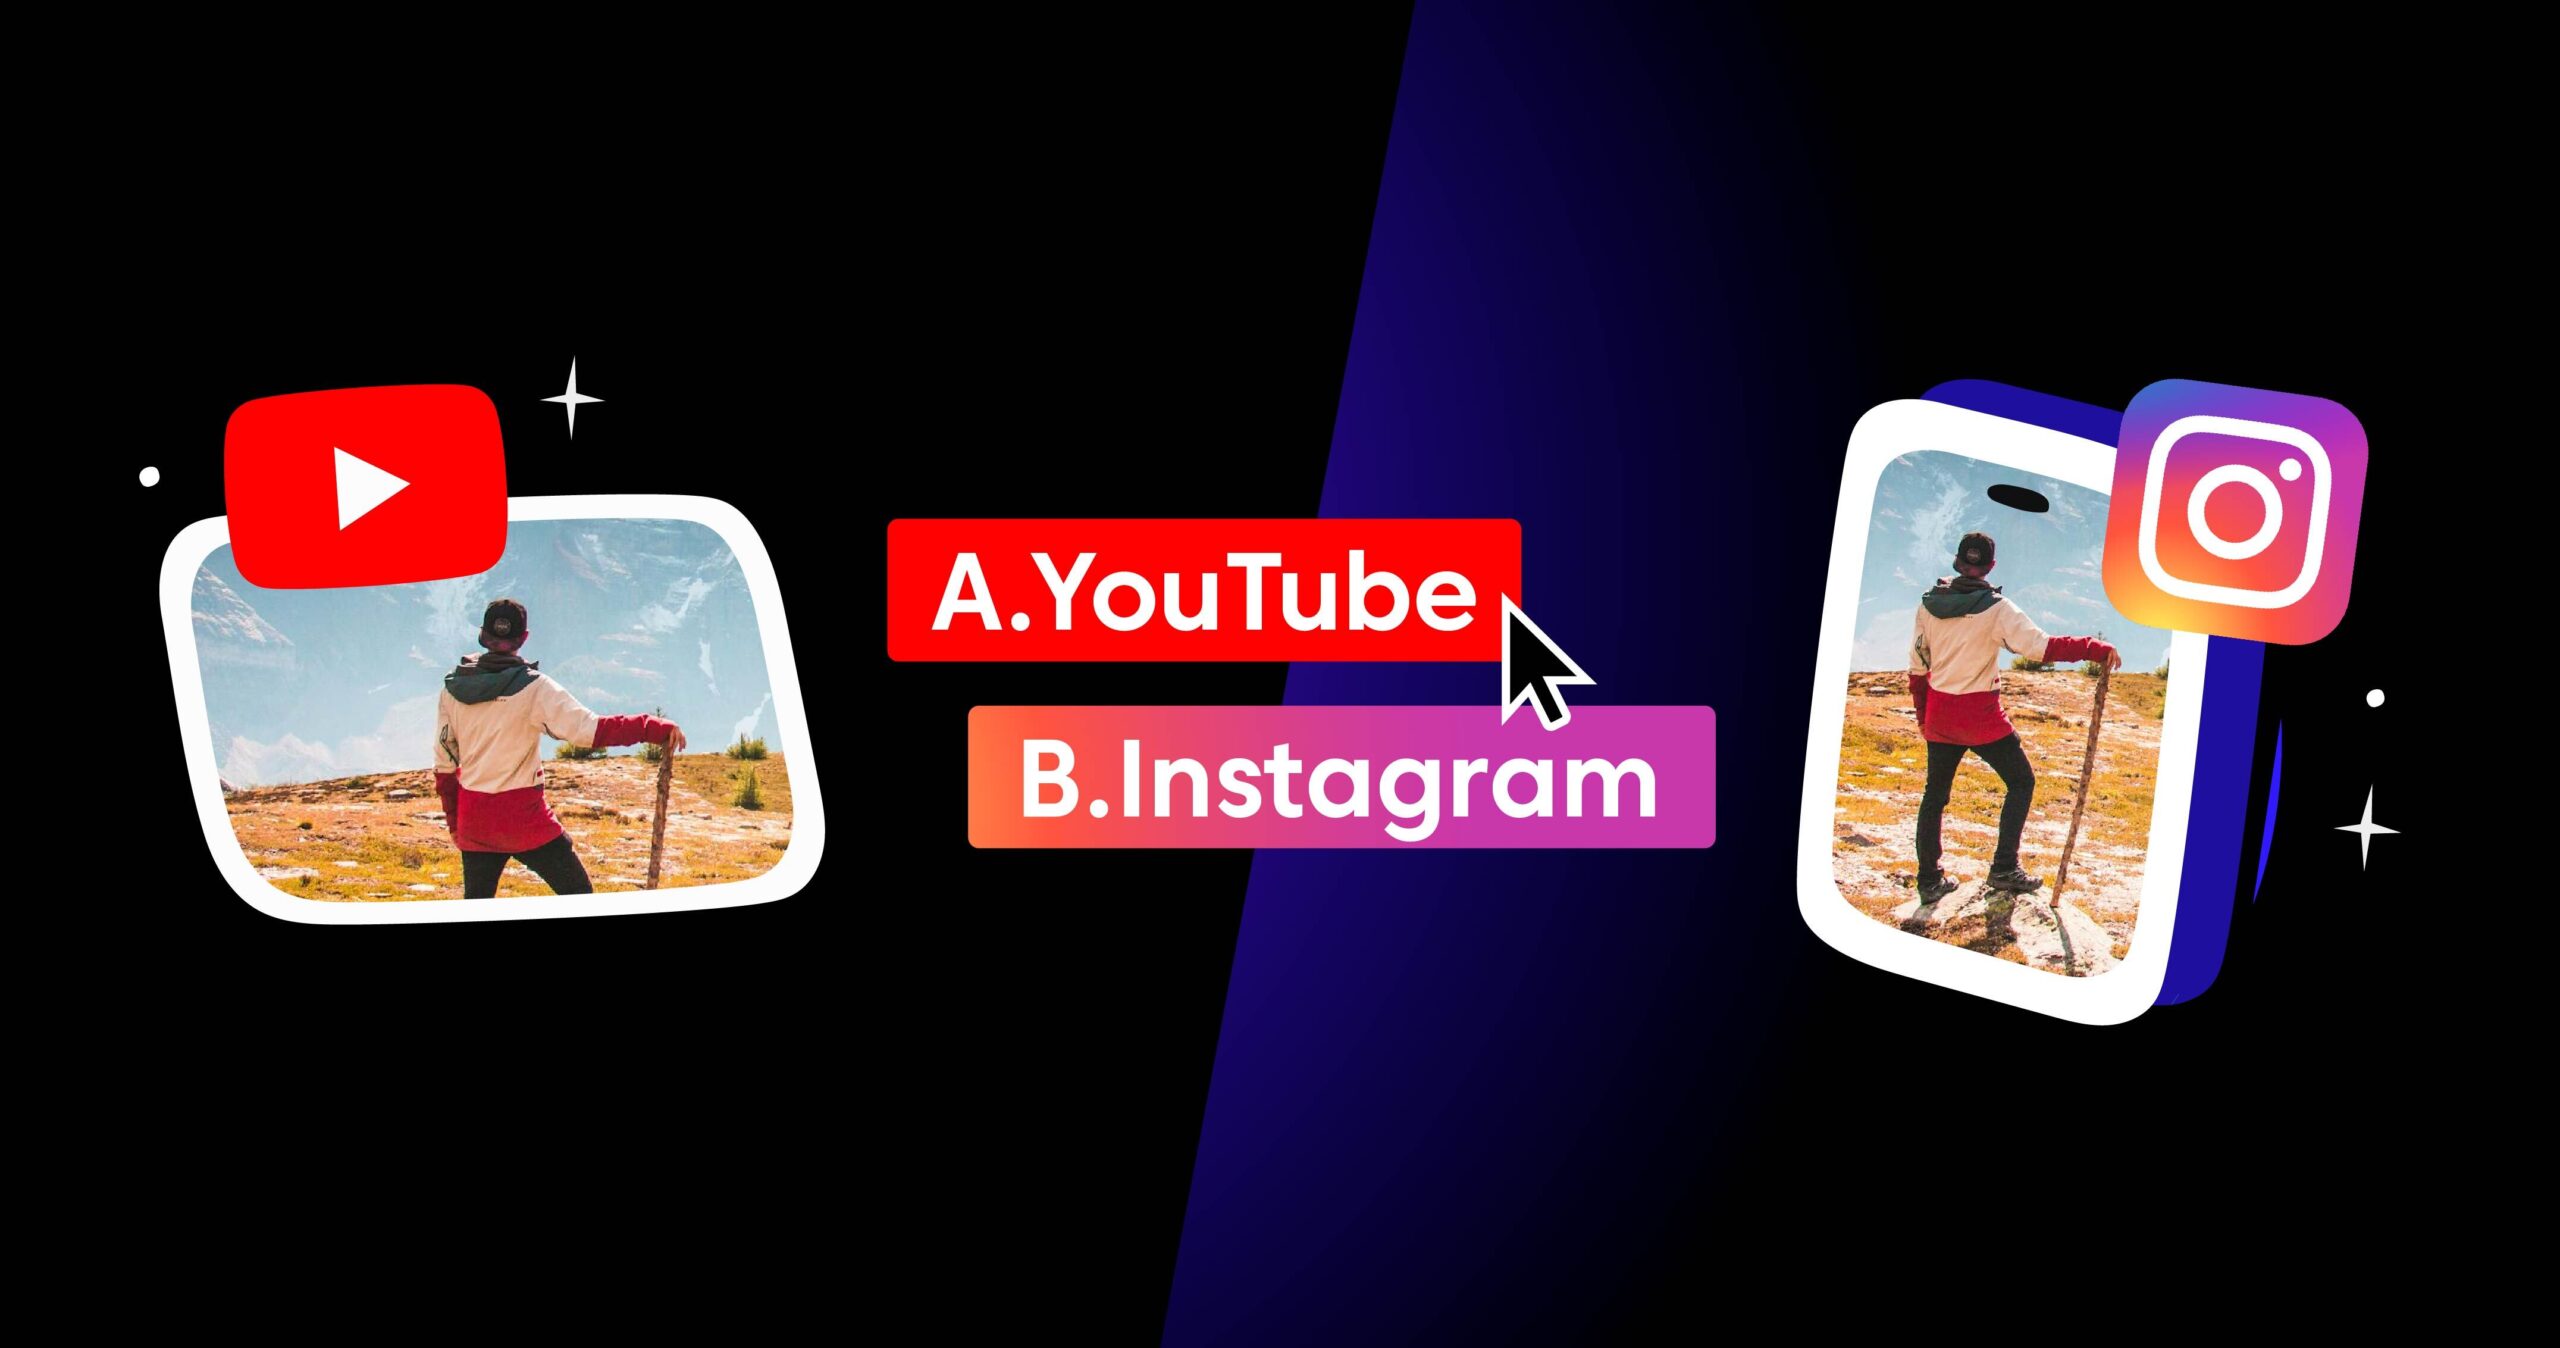 YouTube vs. Instagram: Which Platform Is the Best for Streaming?